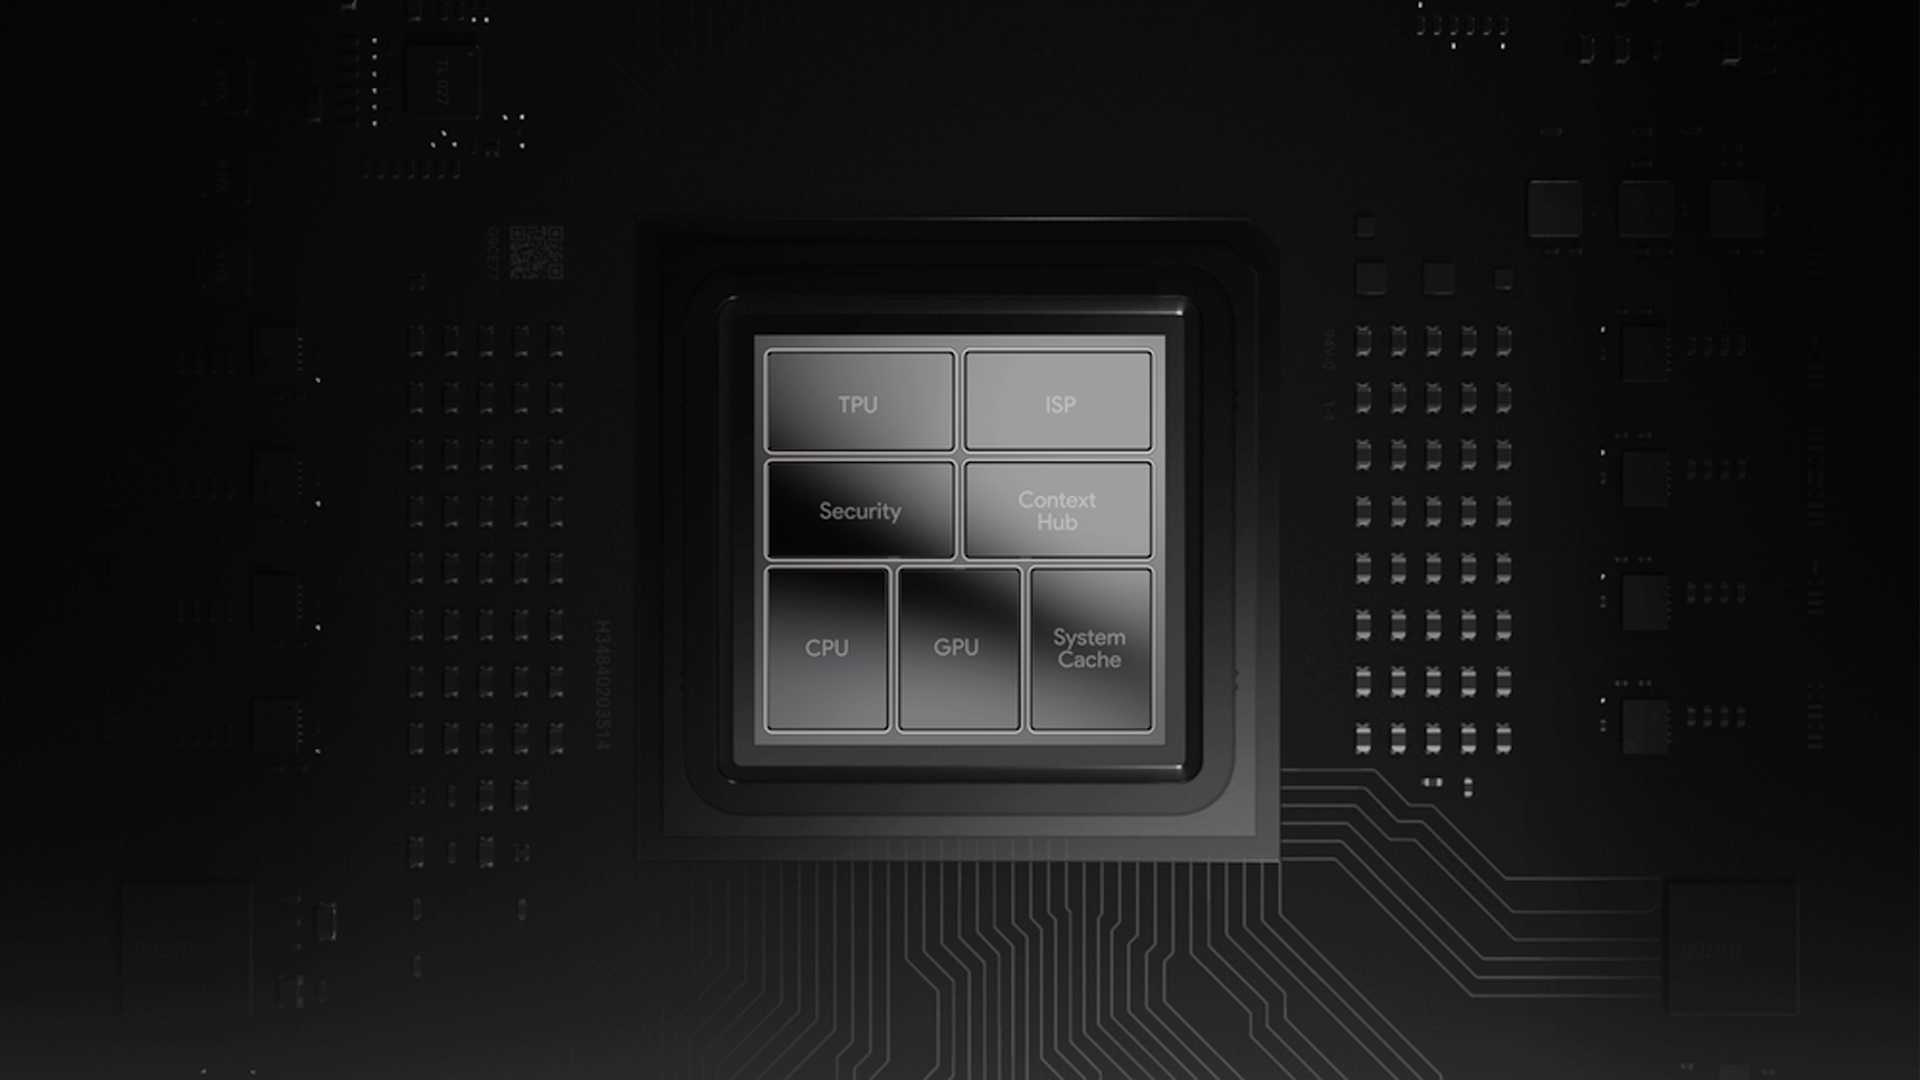 The Tensor chip labeled to show its architecture layout.